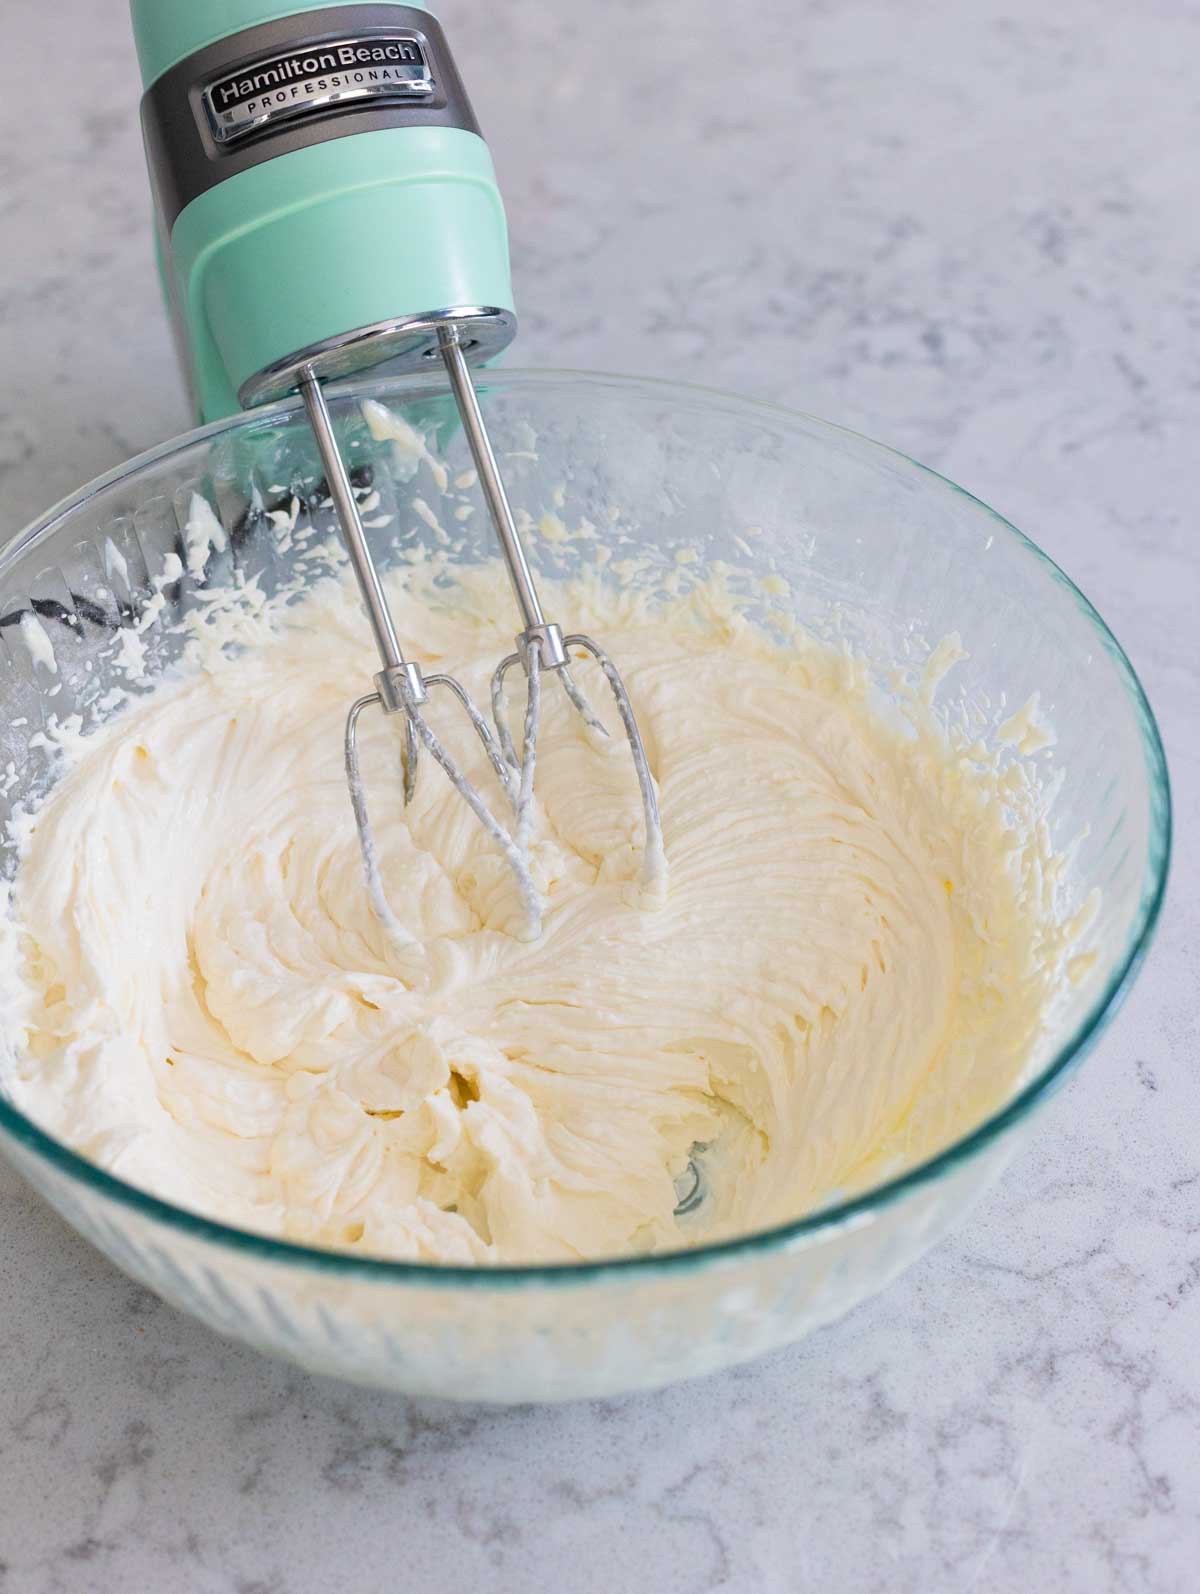 The hand mixer has beaten the cheeses until smooth.